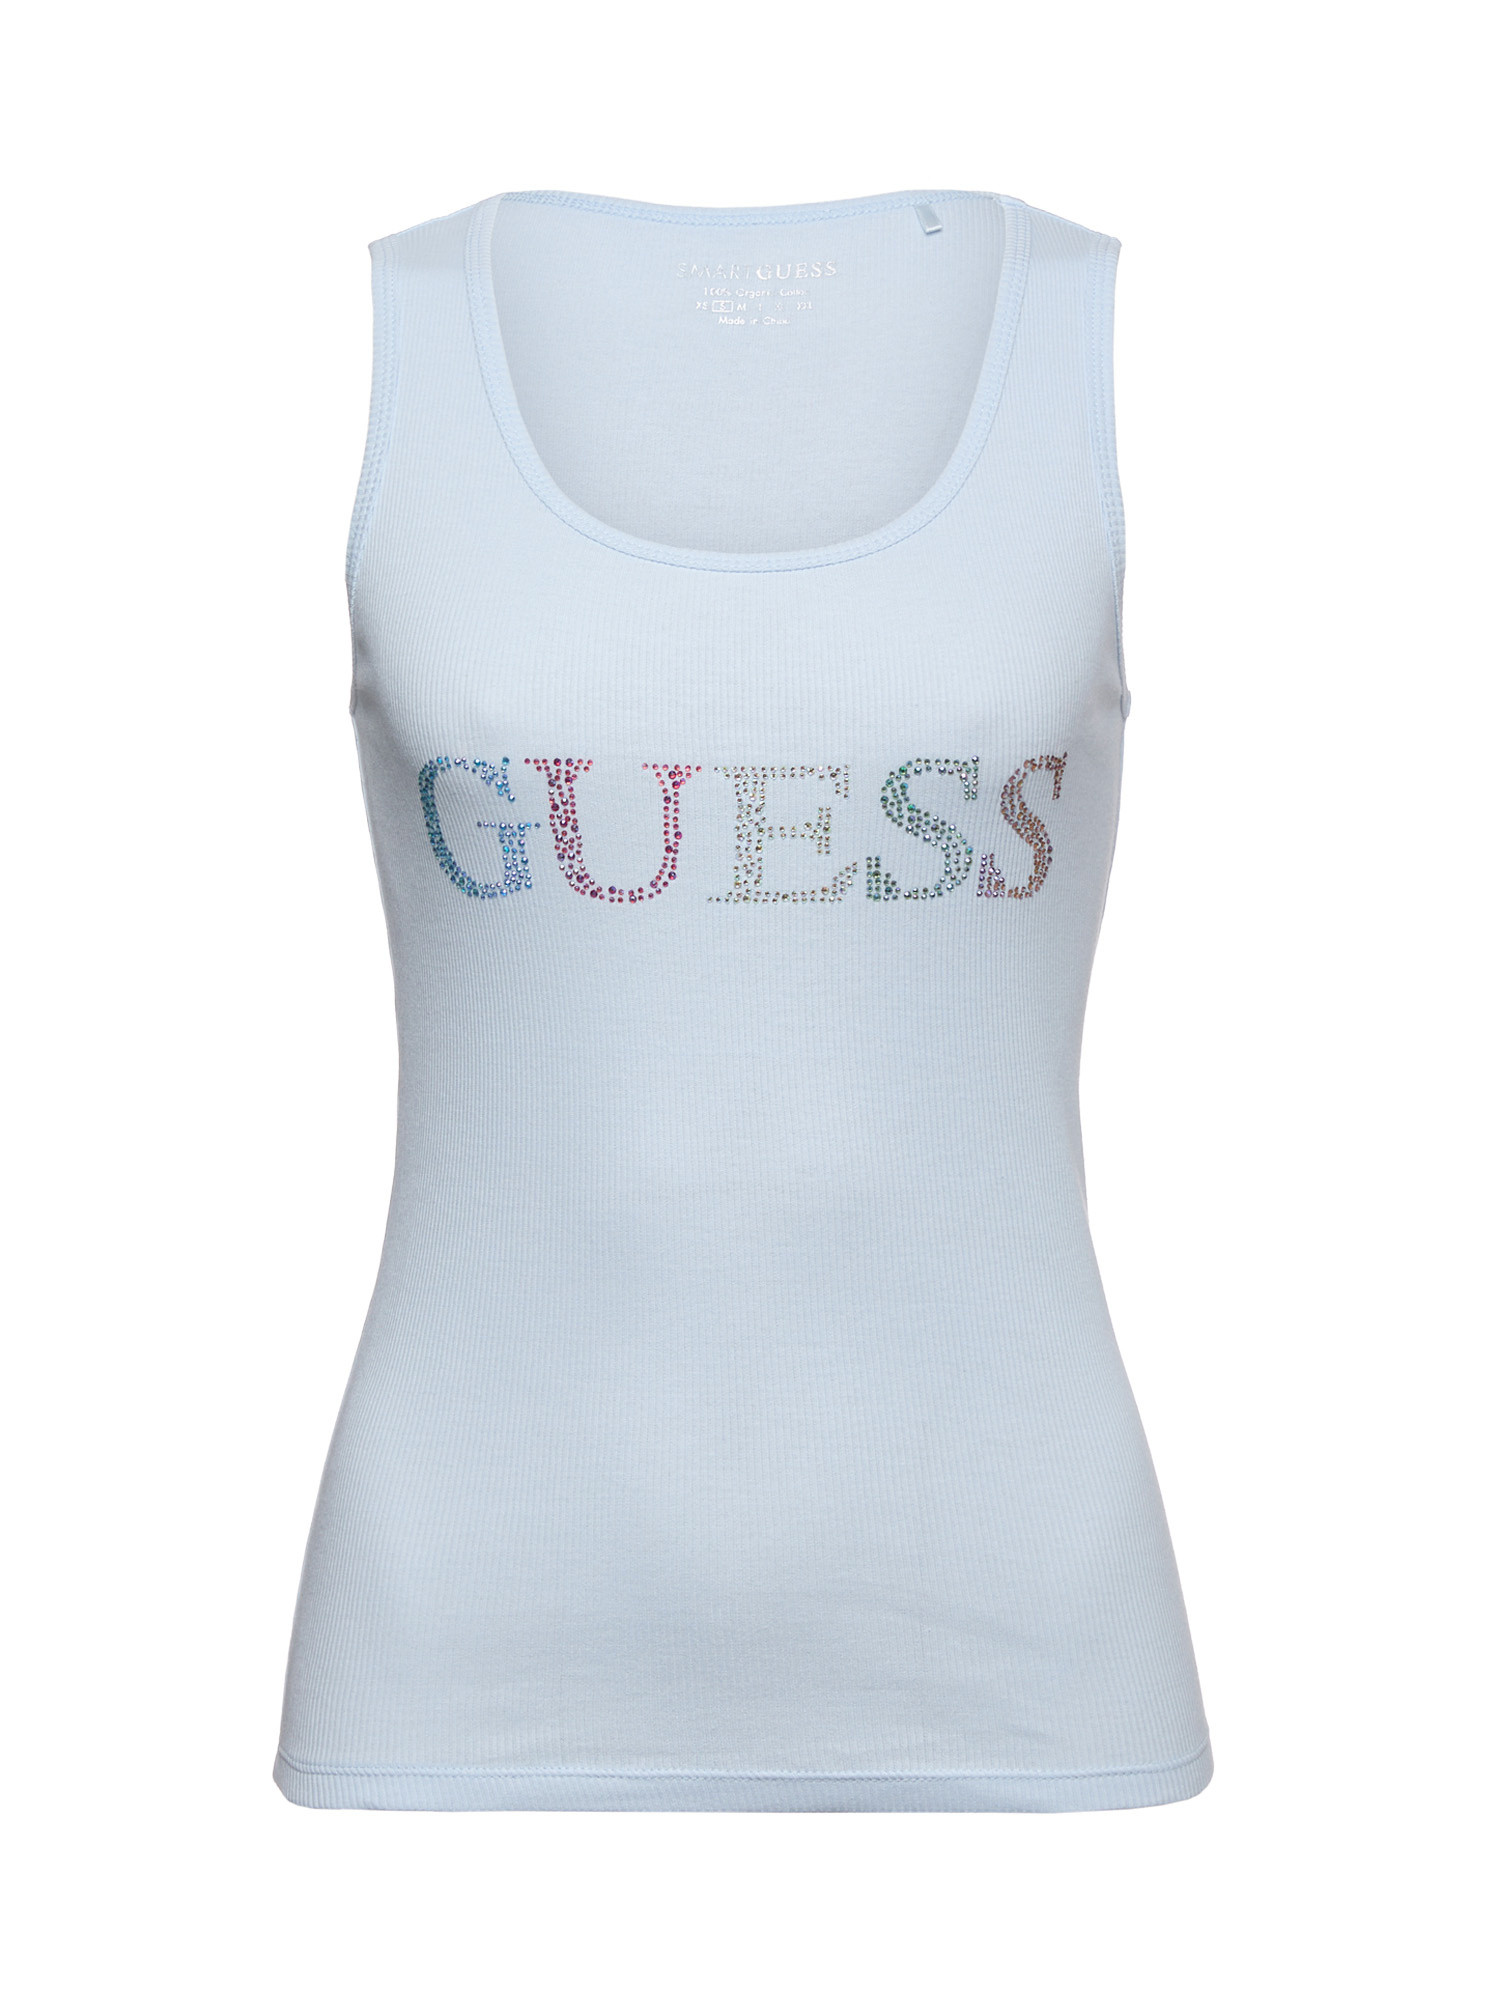 GUESS - Cotton tank top with logo, Light Blue, large image number 0